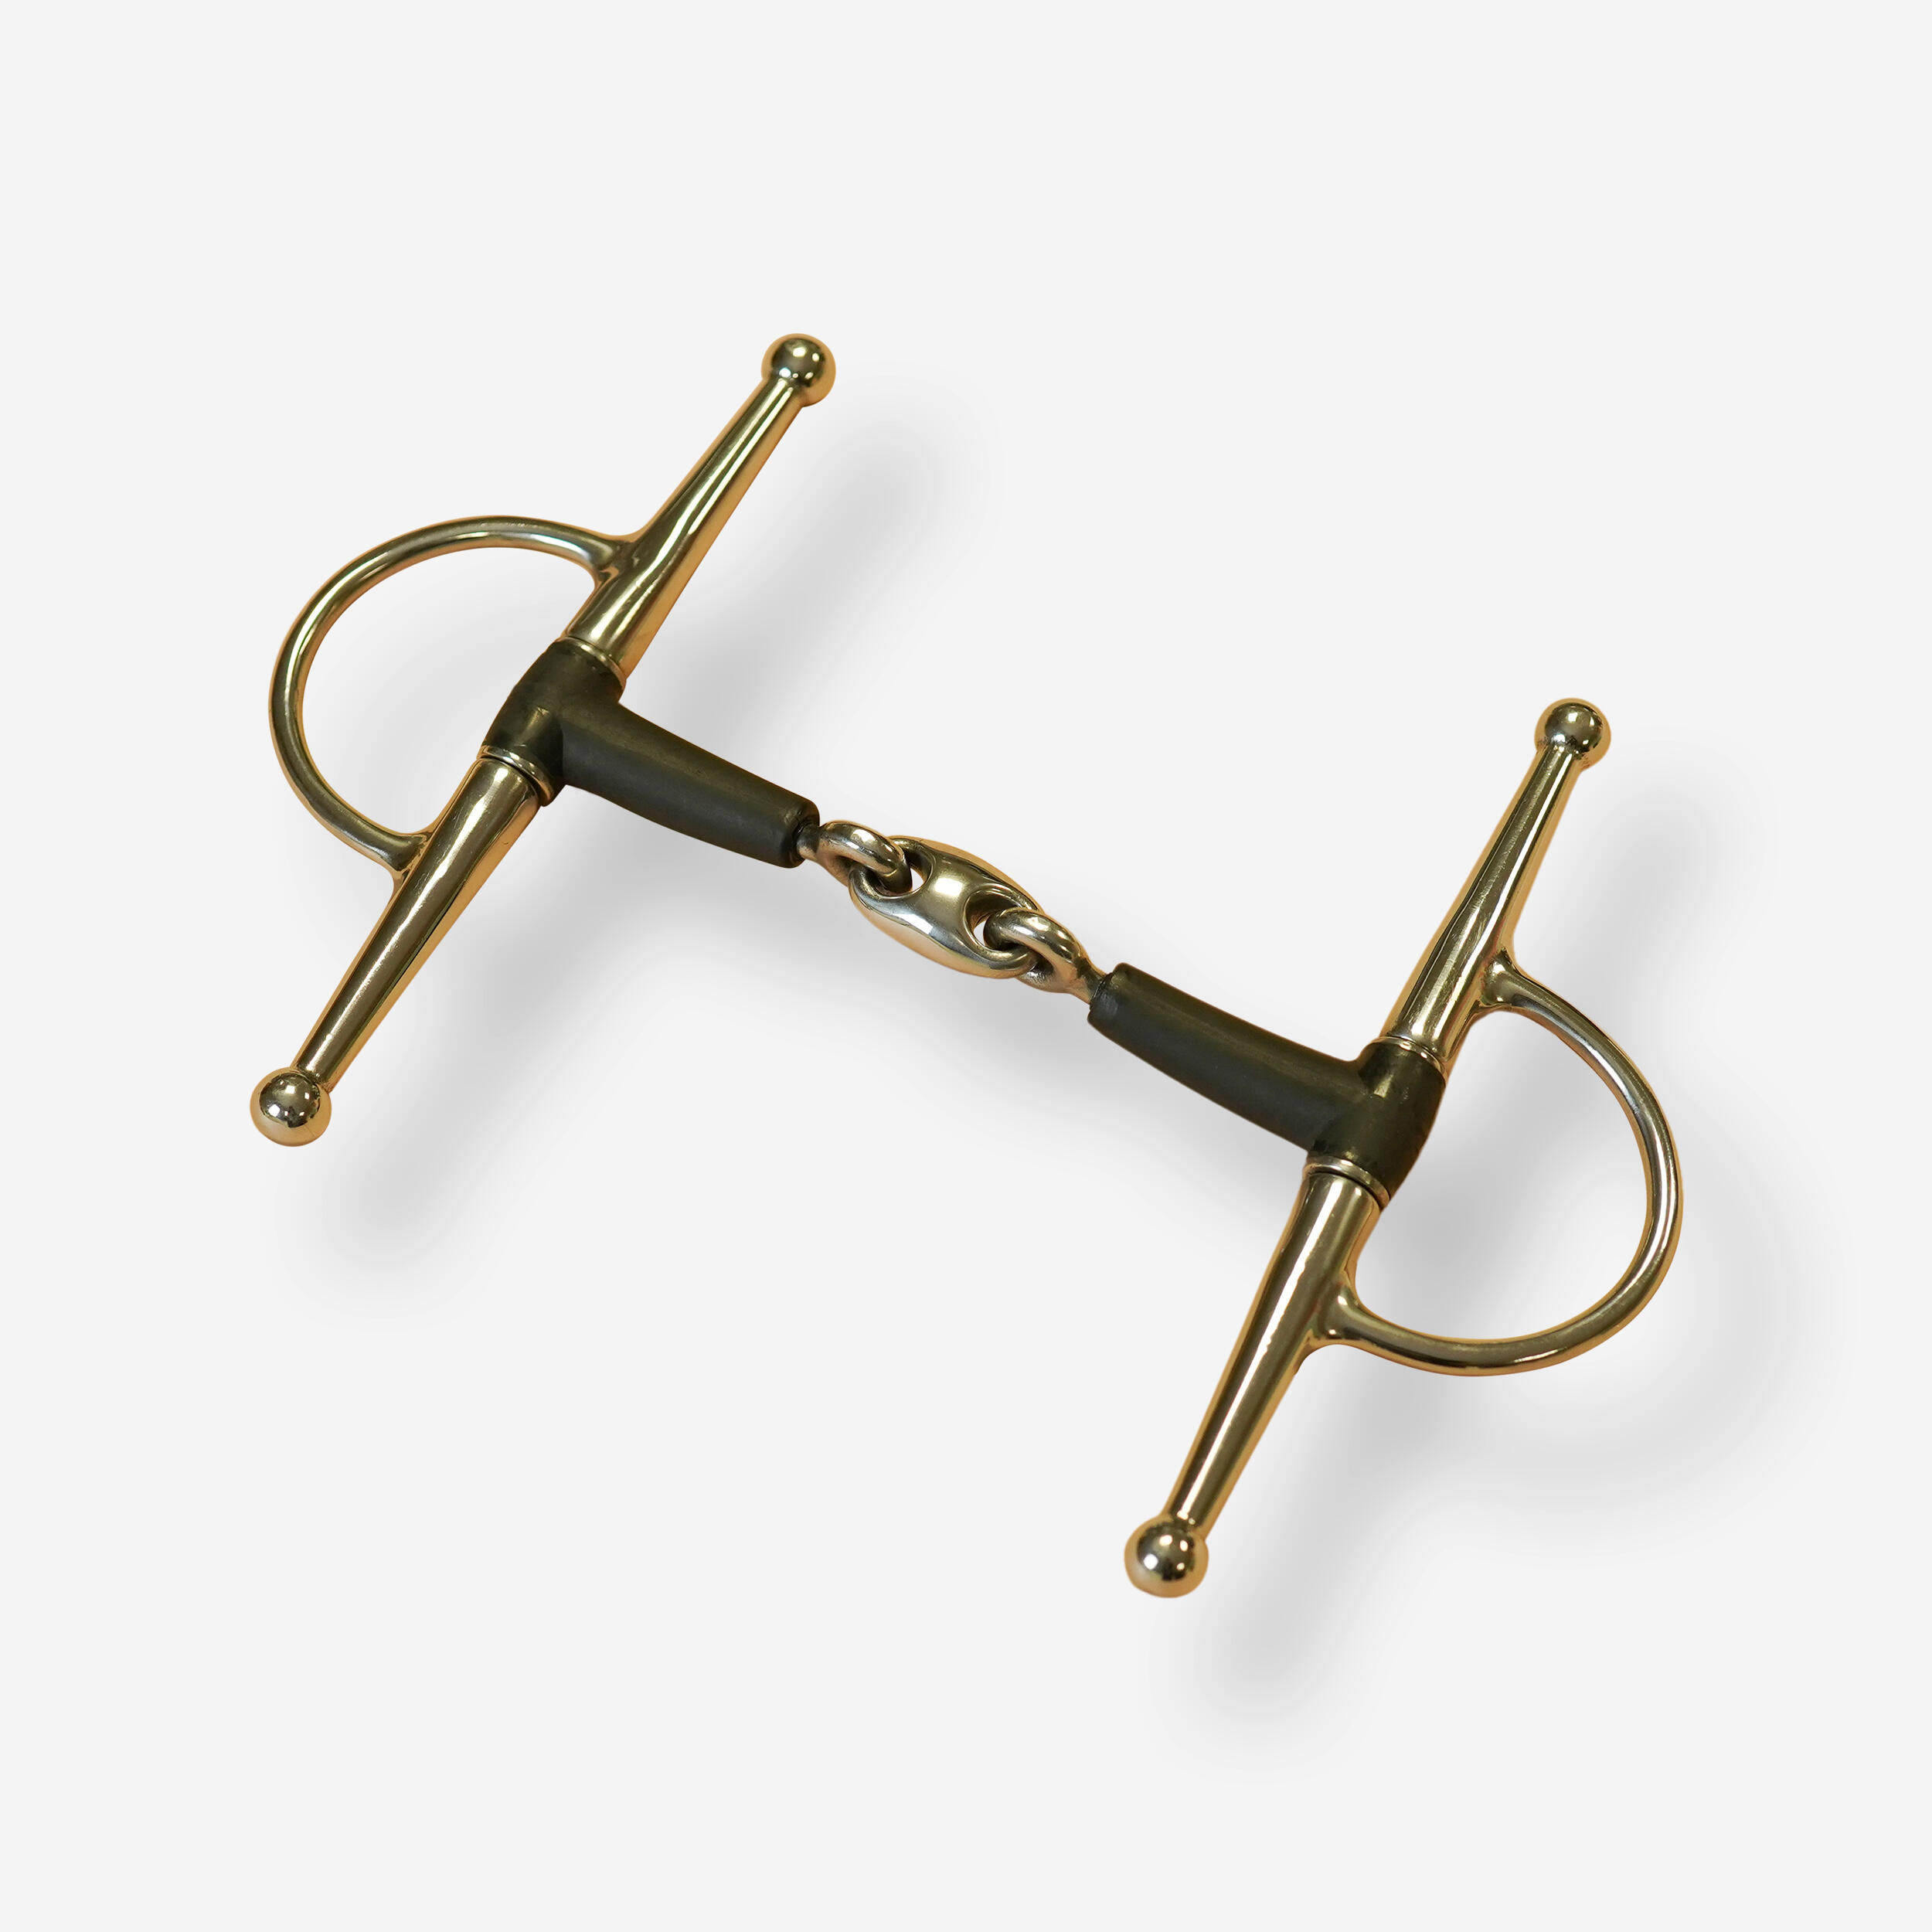 FOUGANZA Double-Jointed Full Cheek Snaffle Bit for Horse & Pony